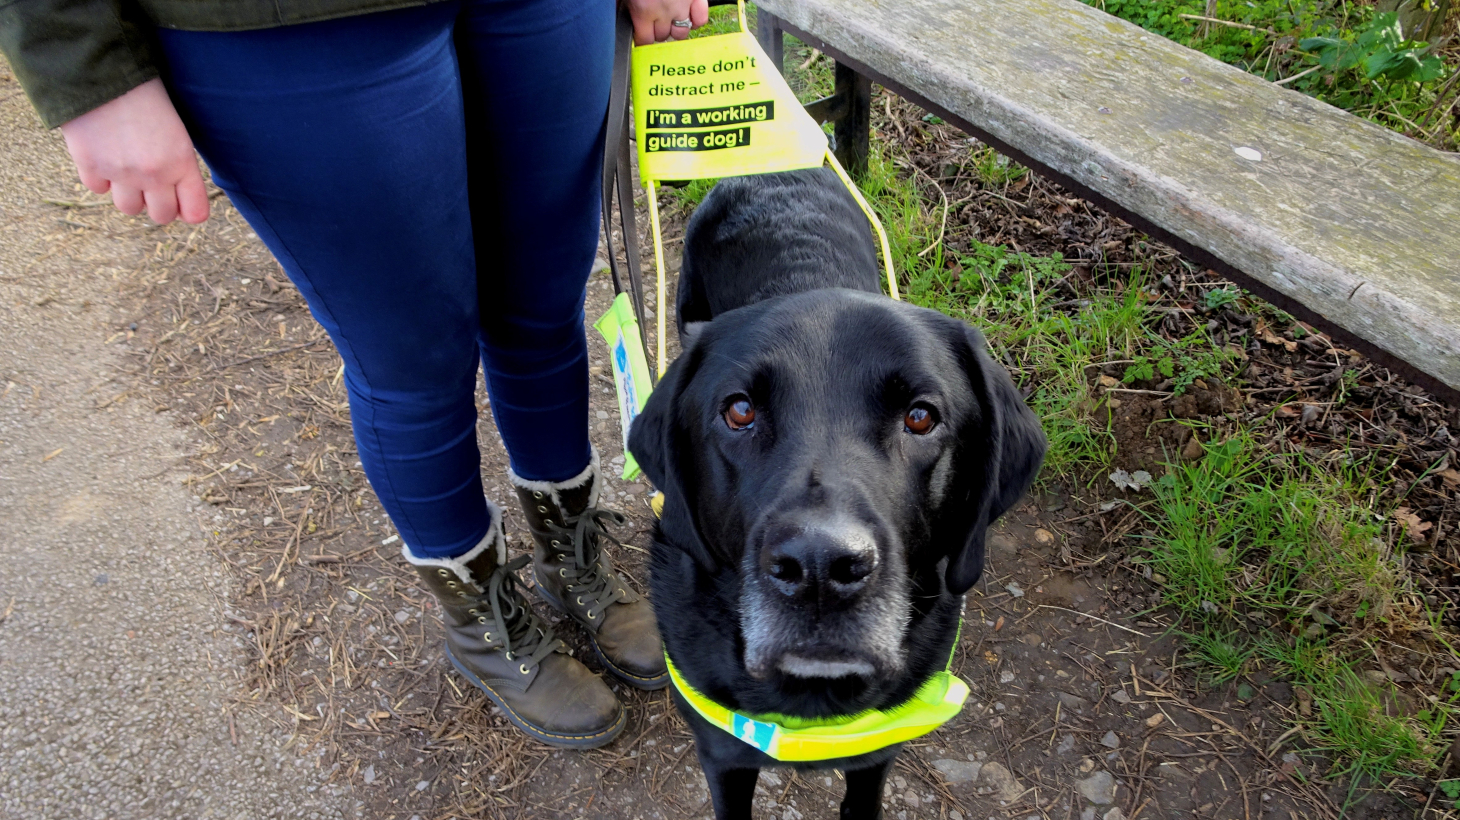 who picks up guide dogs poop uk